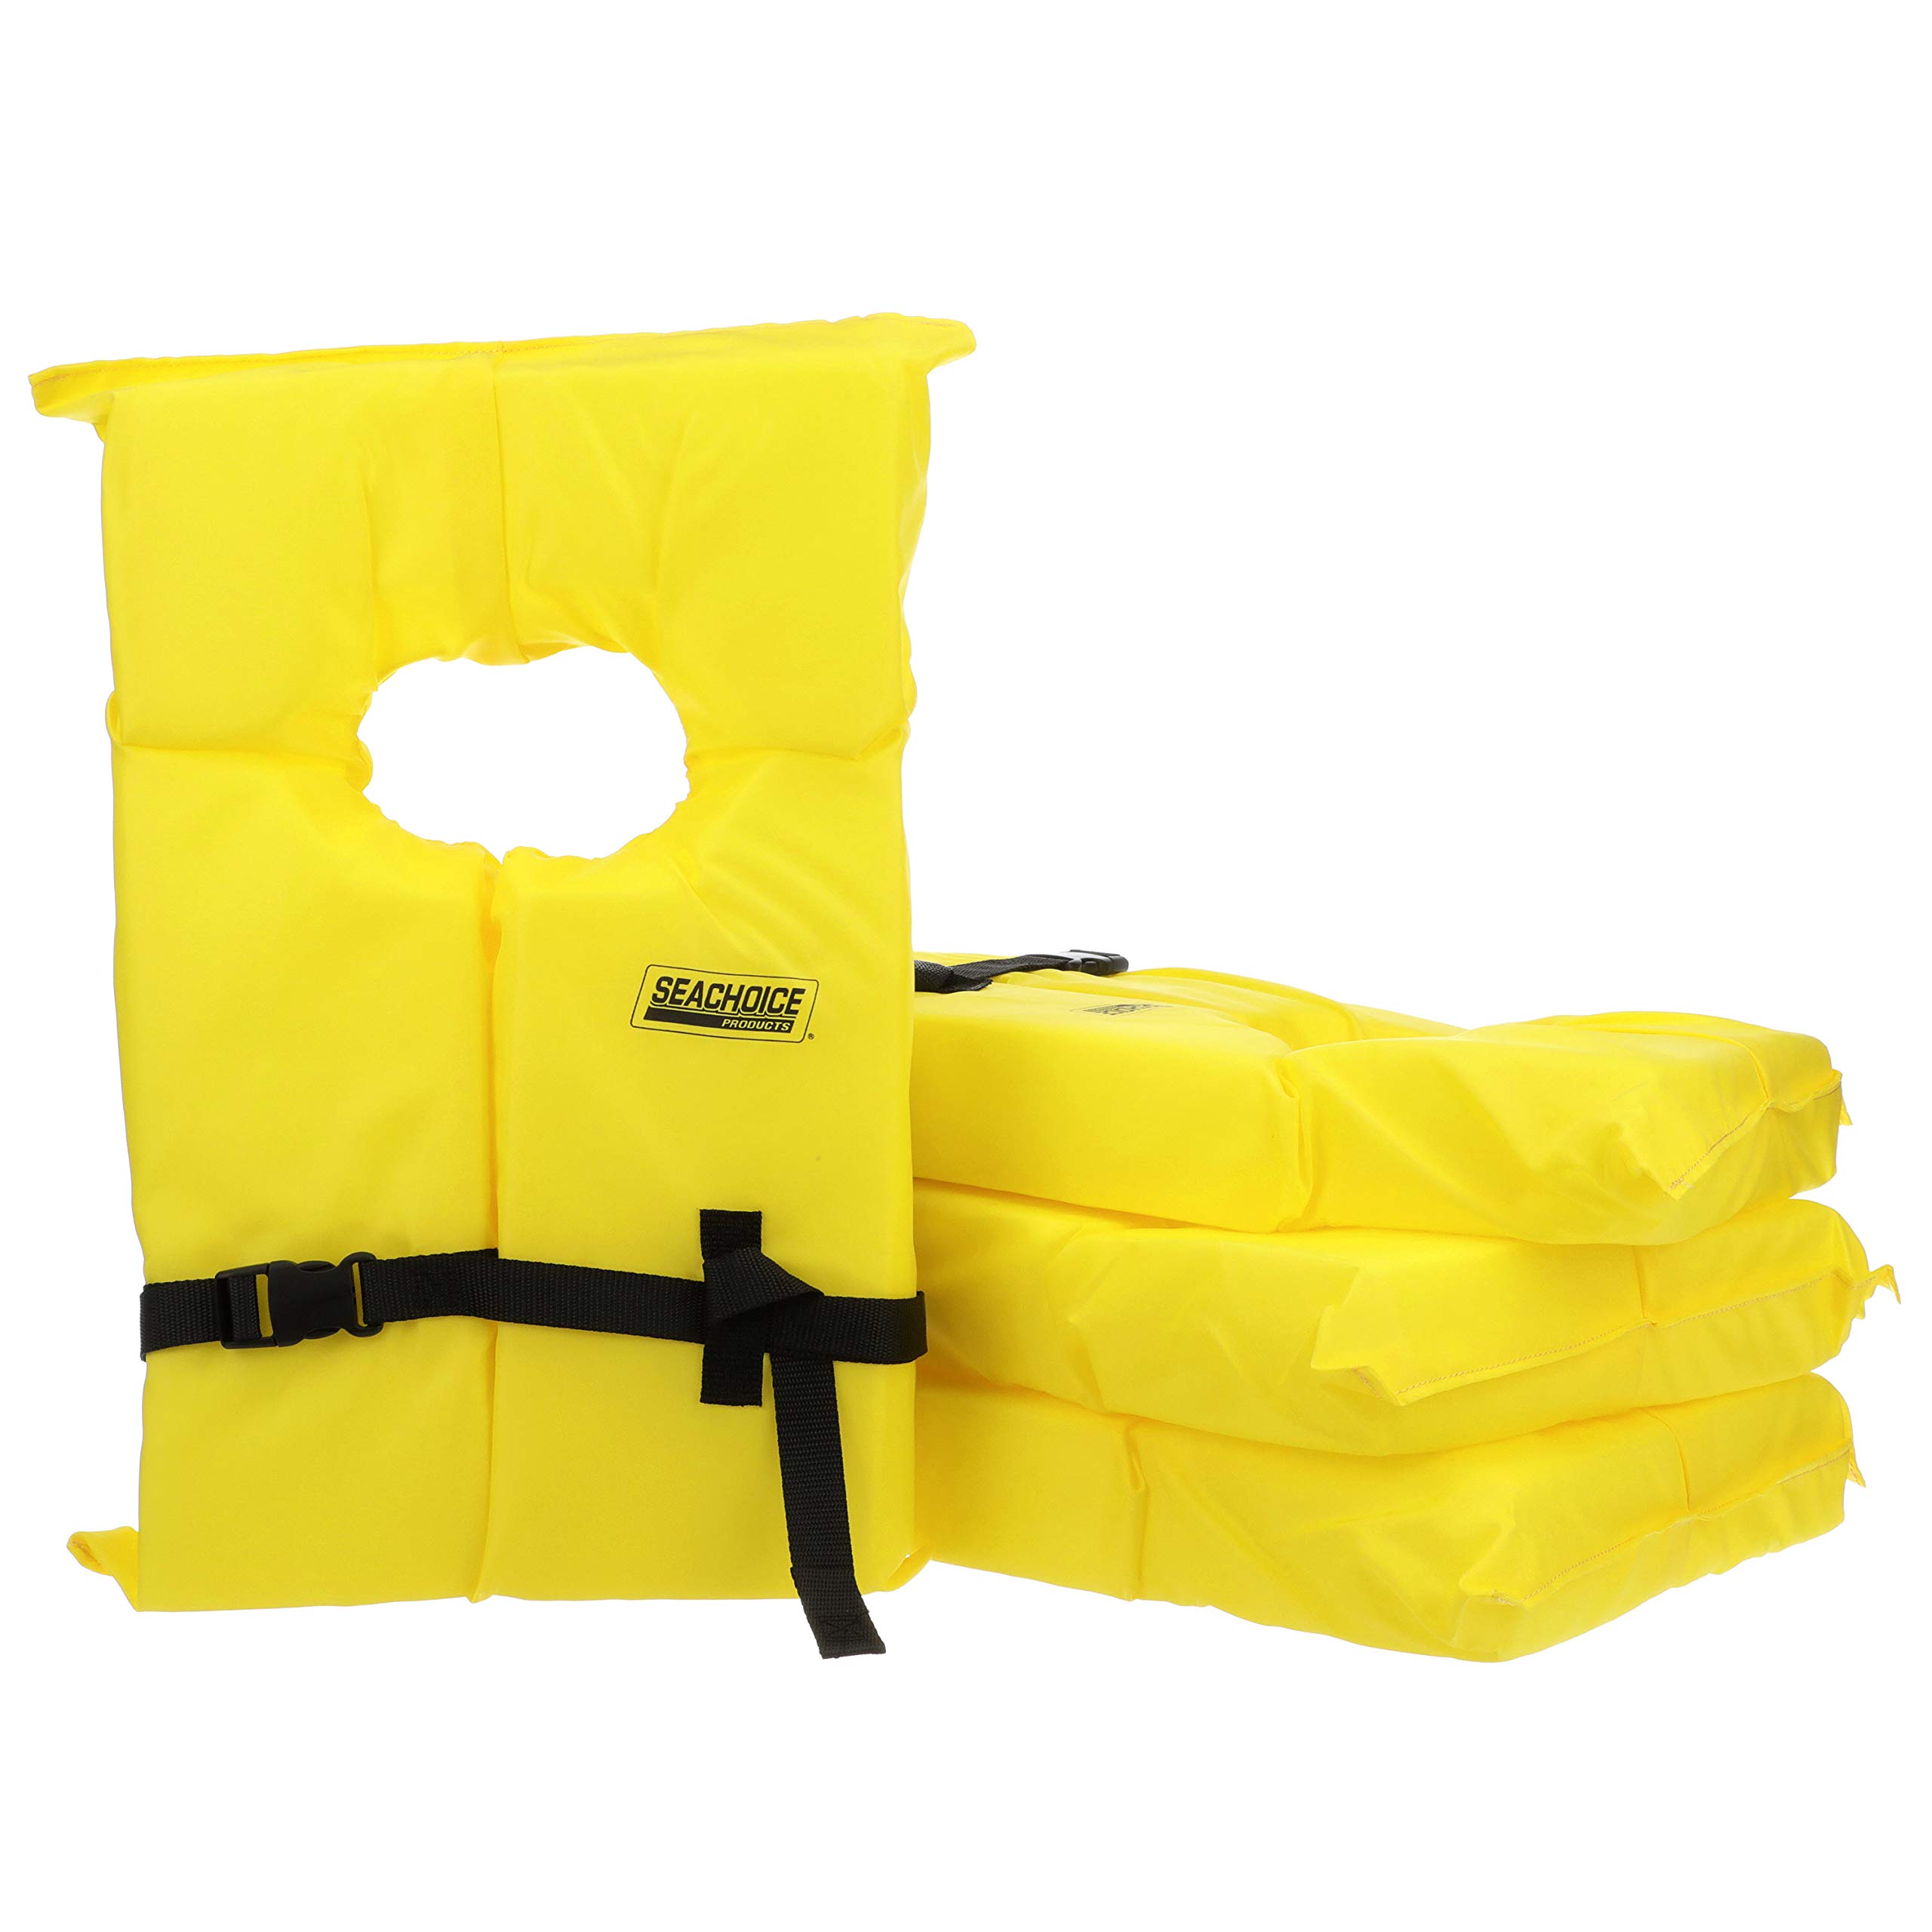 Seachoice Life Vest, Type II Personal Flotation Device - USCG Approved - Multiple Sizes and Colors